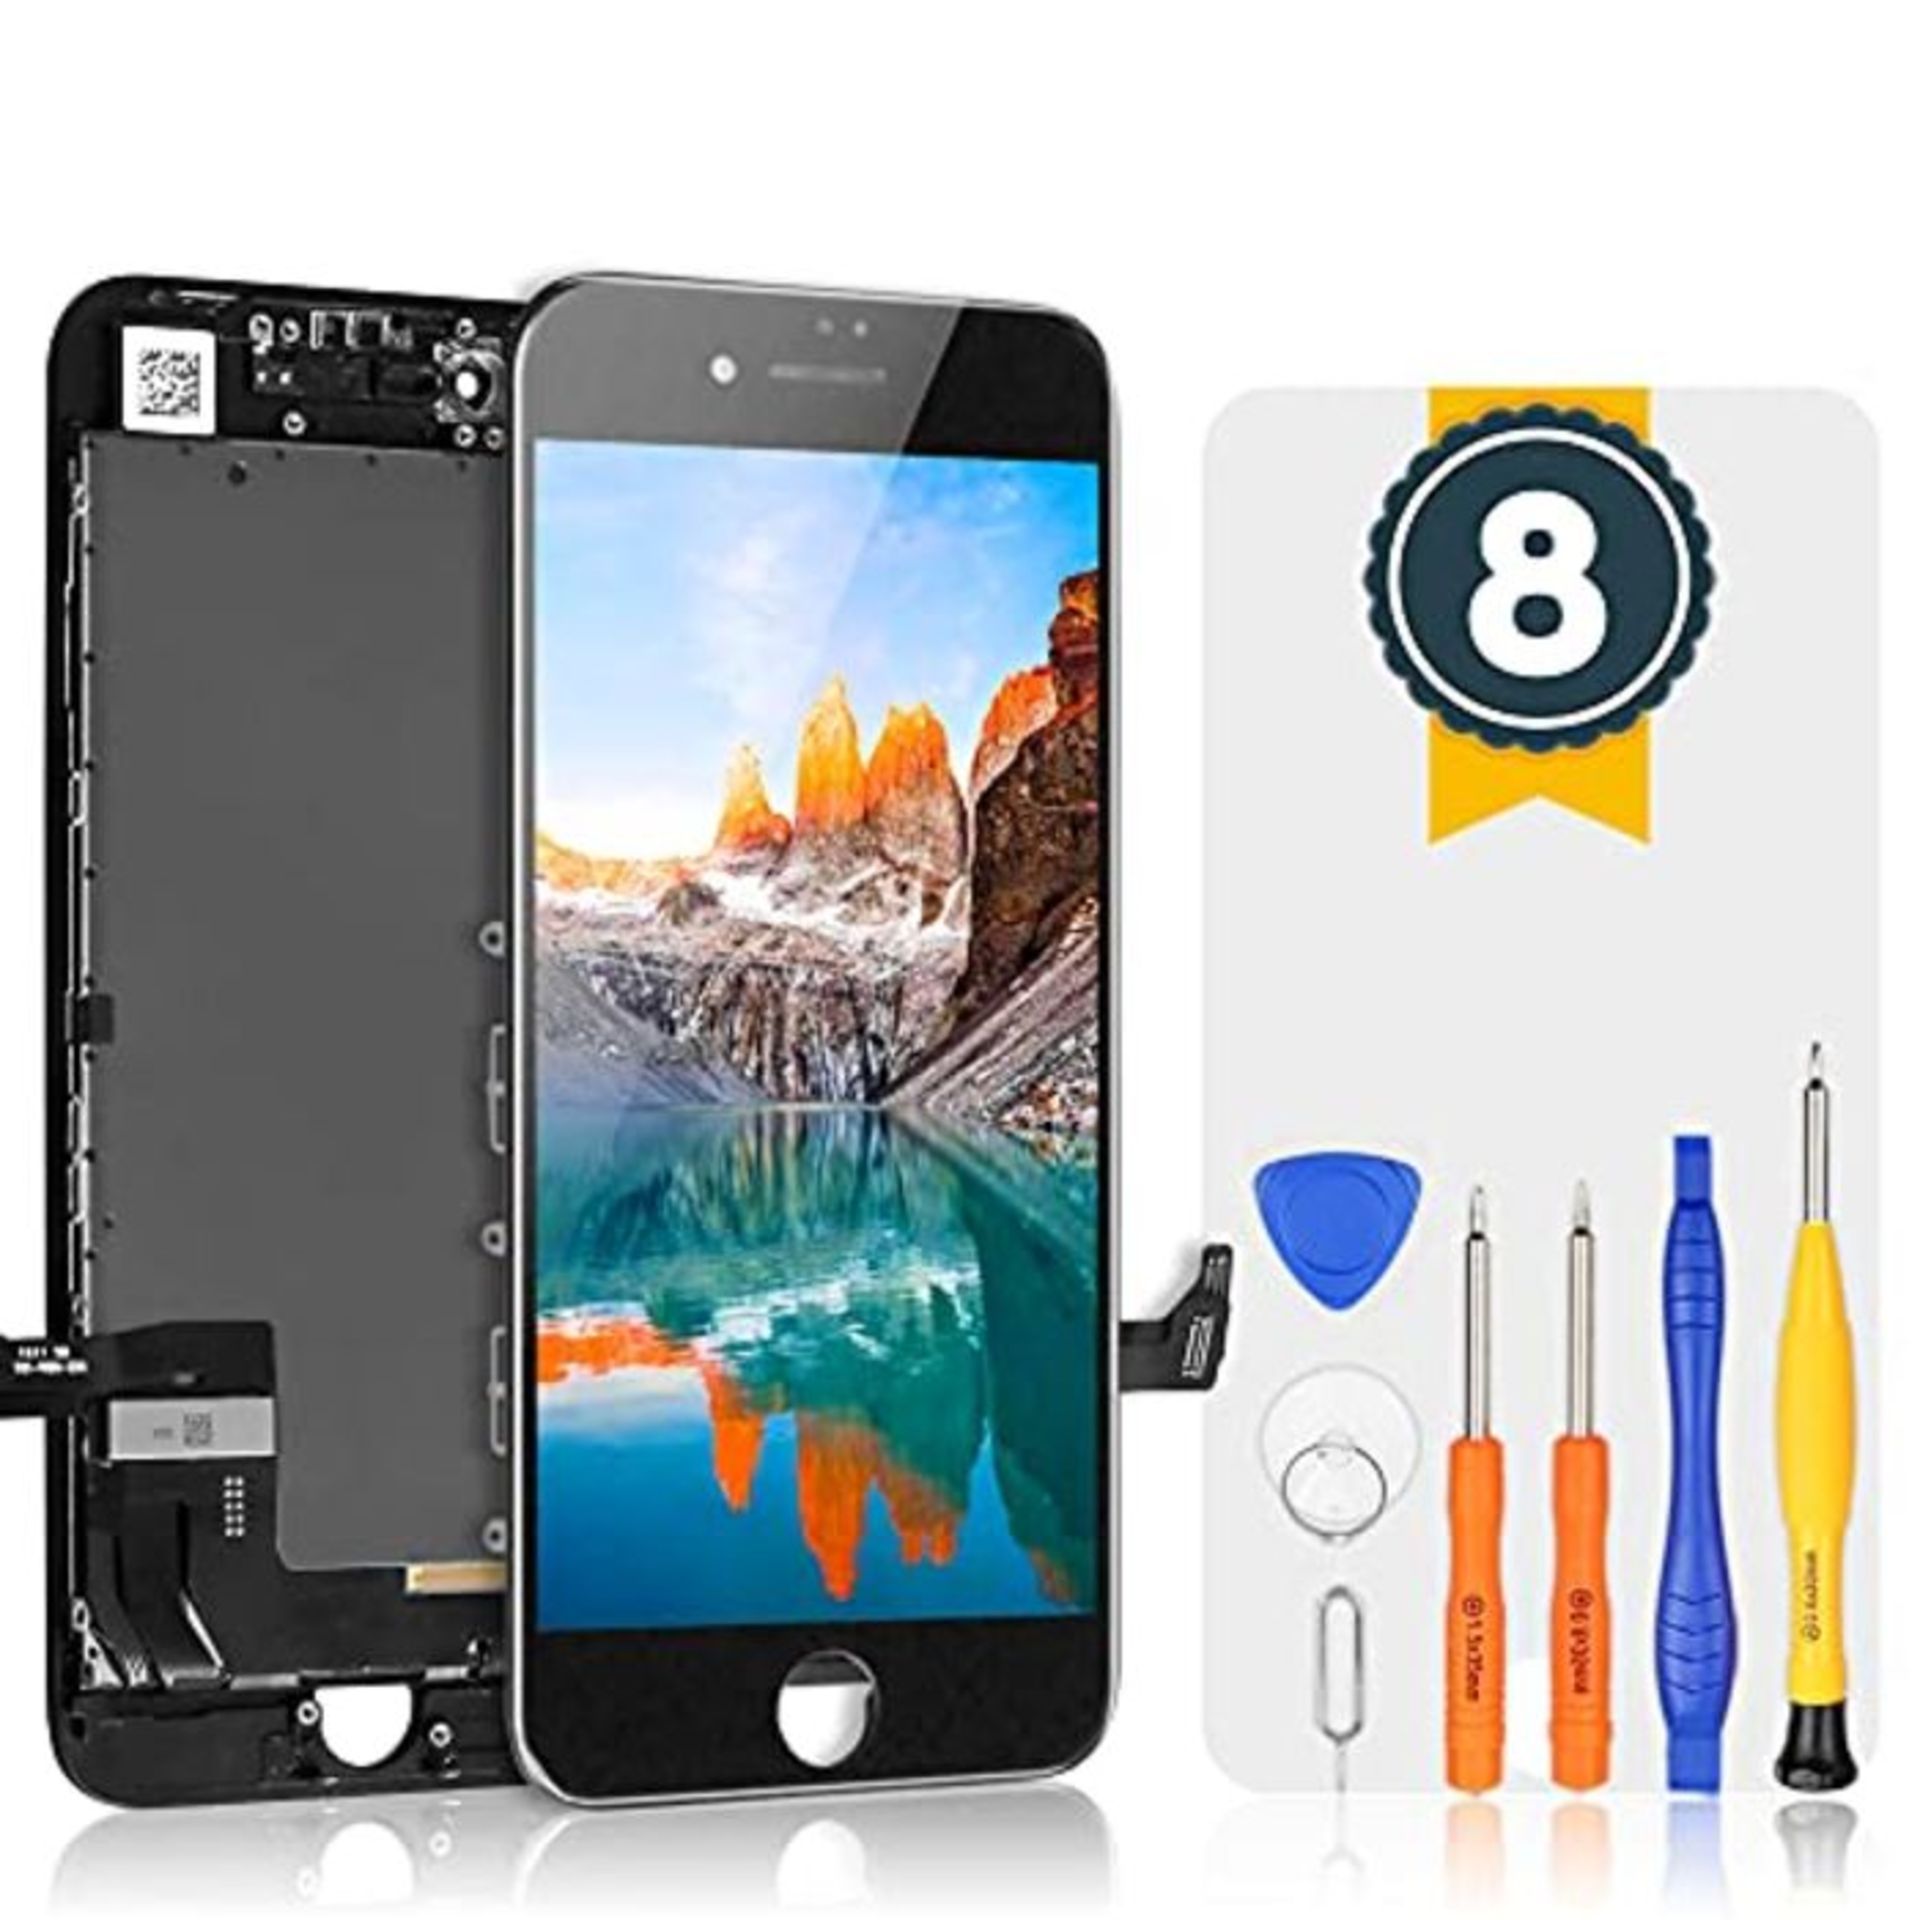 bokman for iPhone 8 Black Screen Replacement Parts Display Assembly Front Panel